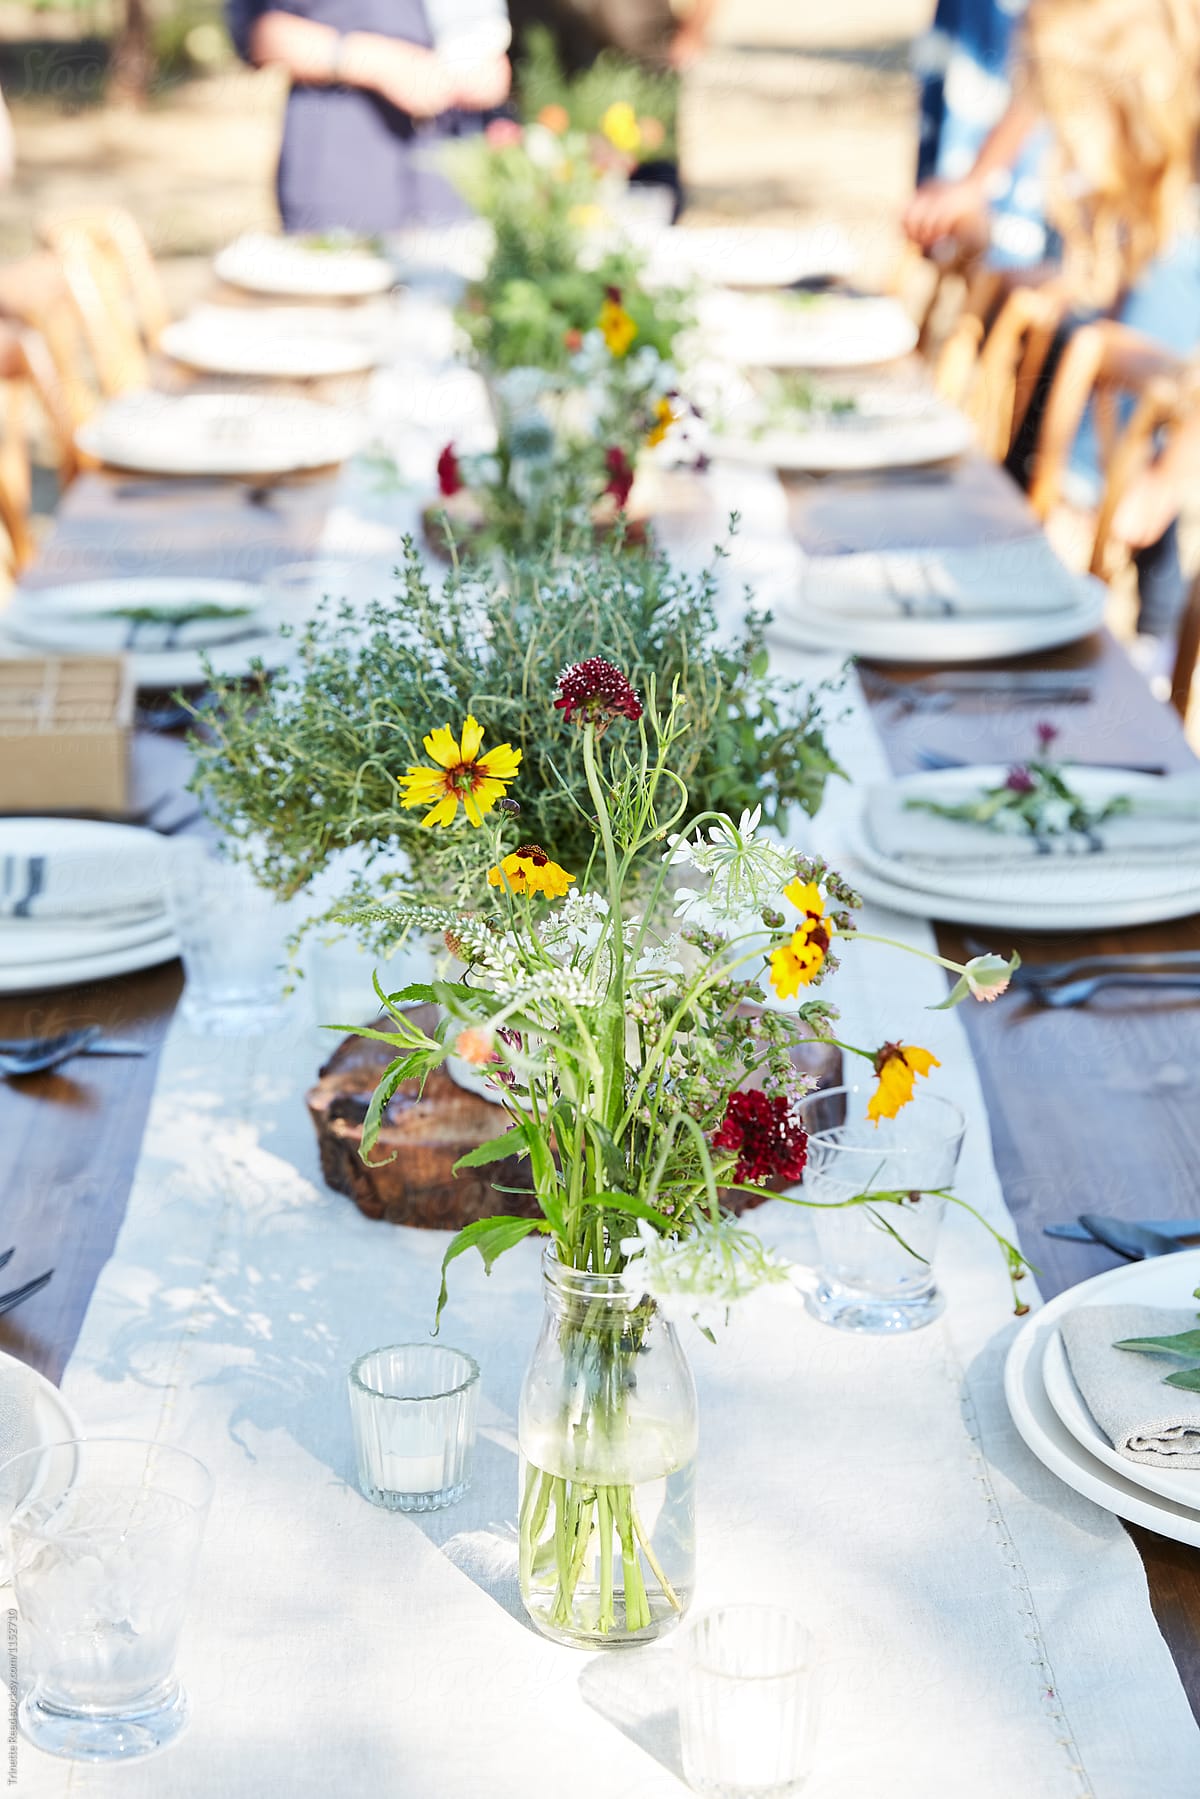 Place setting at a farm to table dinner party